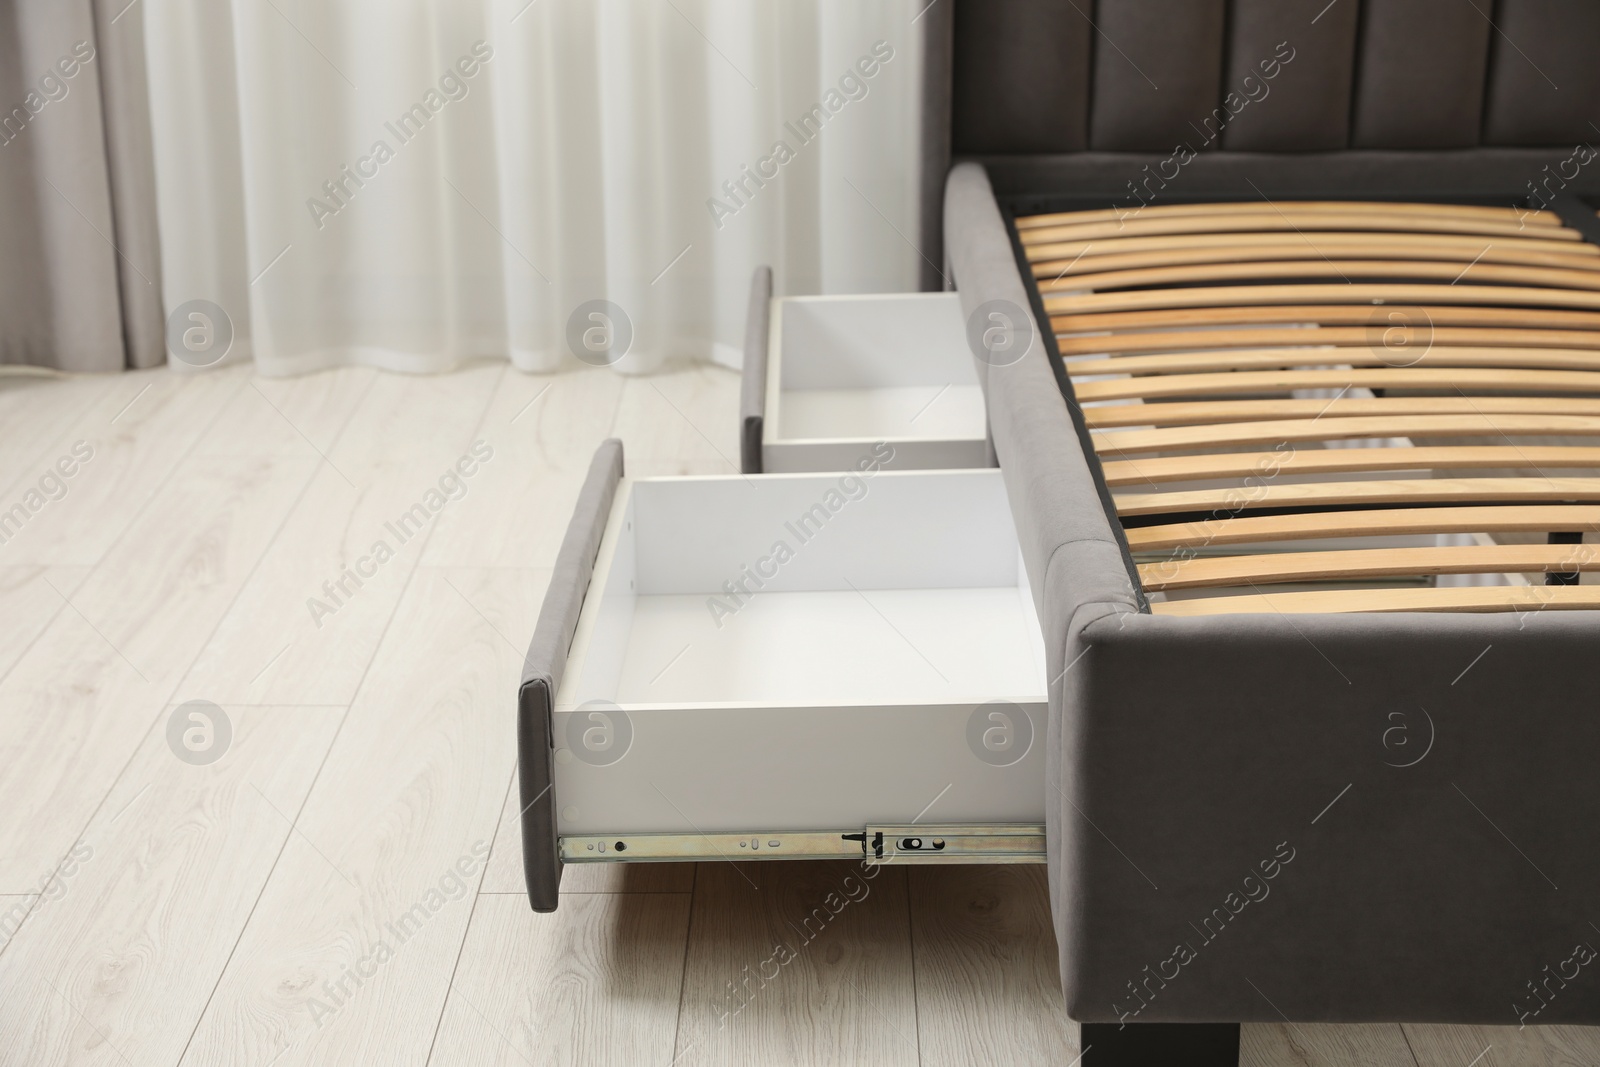 Photo of Storage drawers for bedding under modern bed in room. Space for text